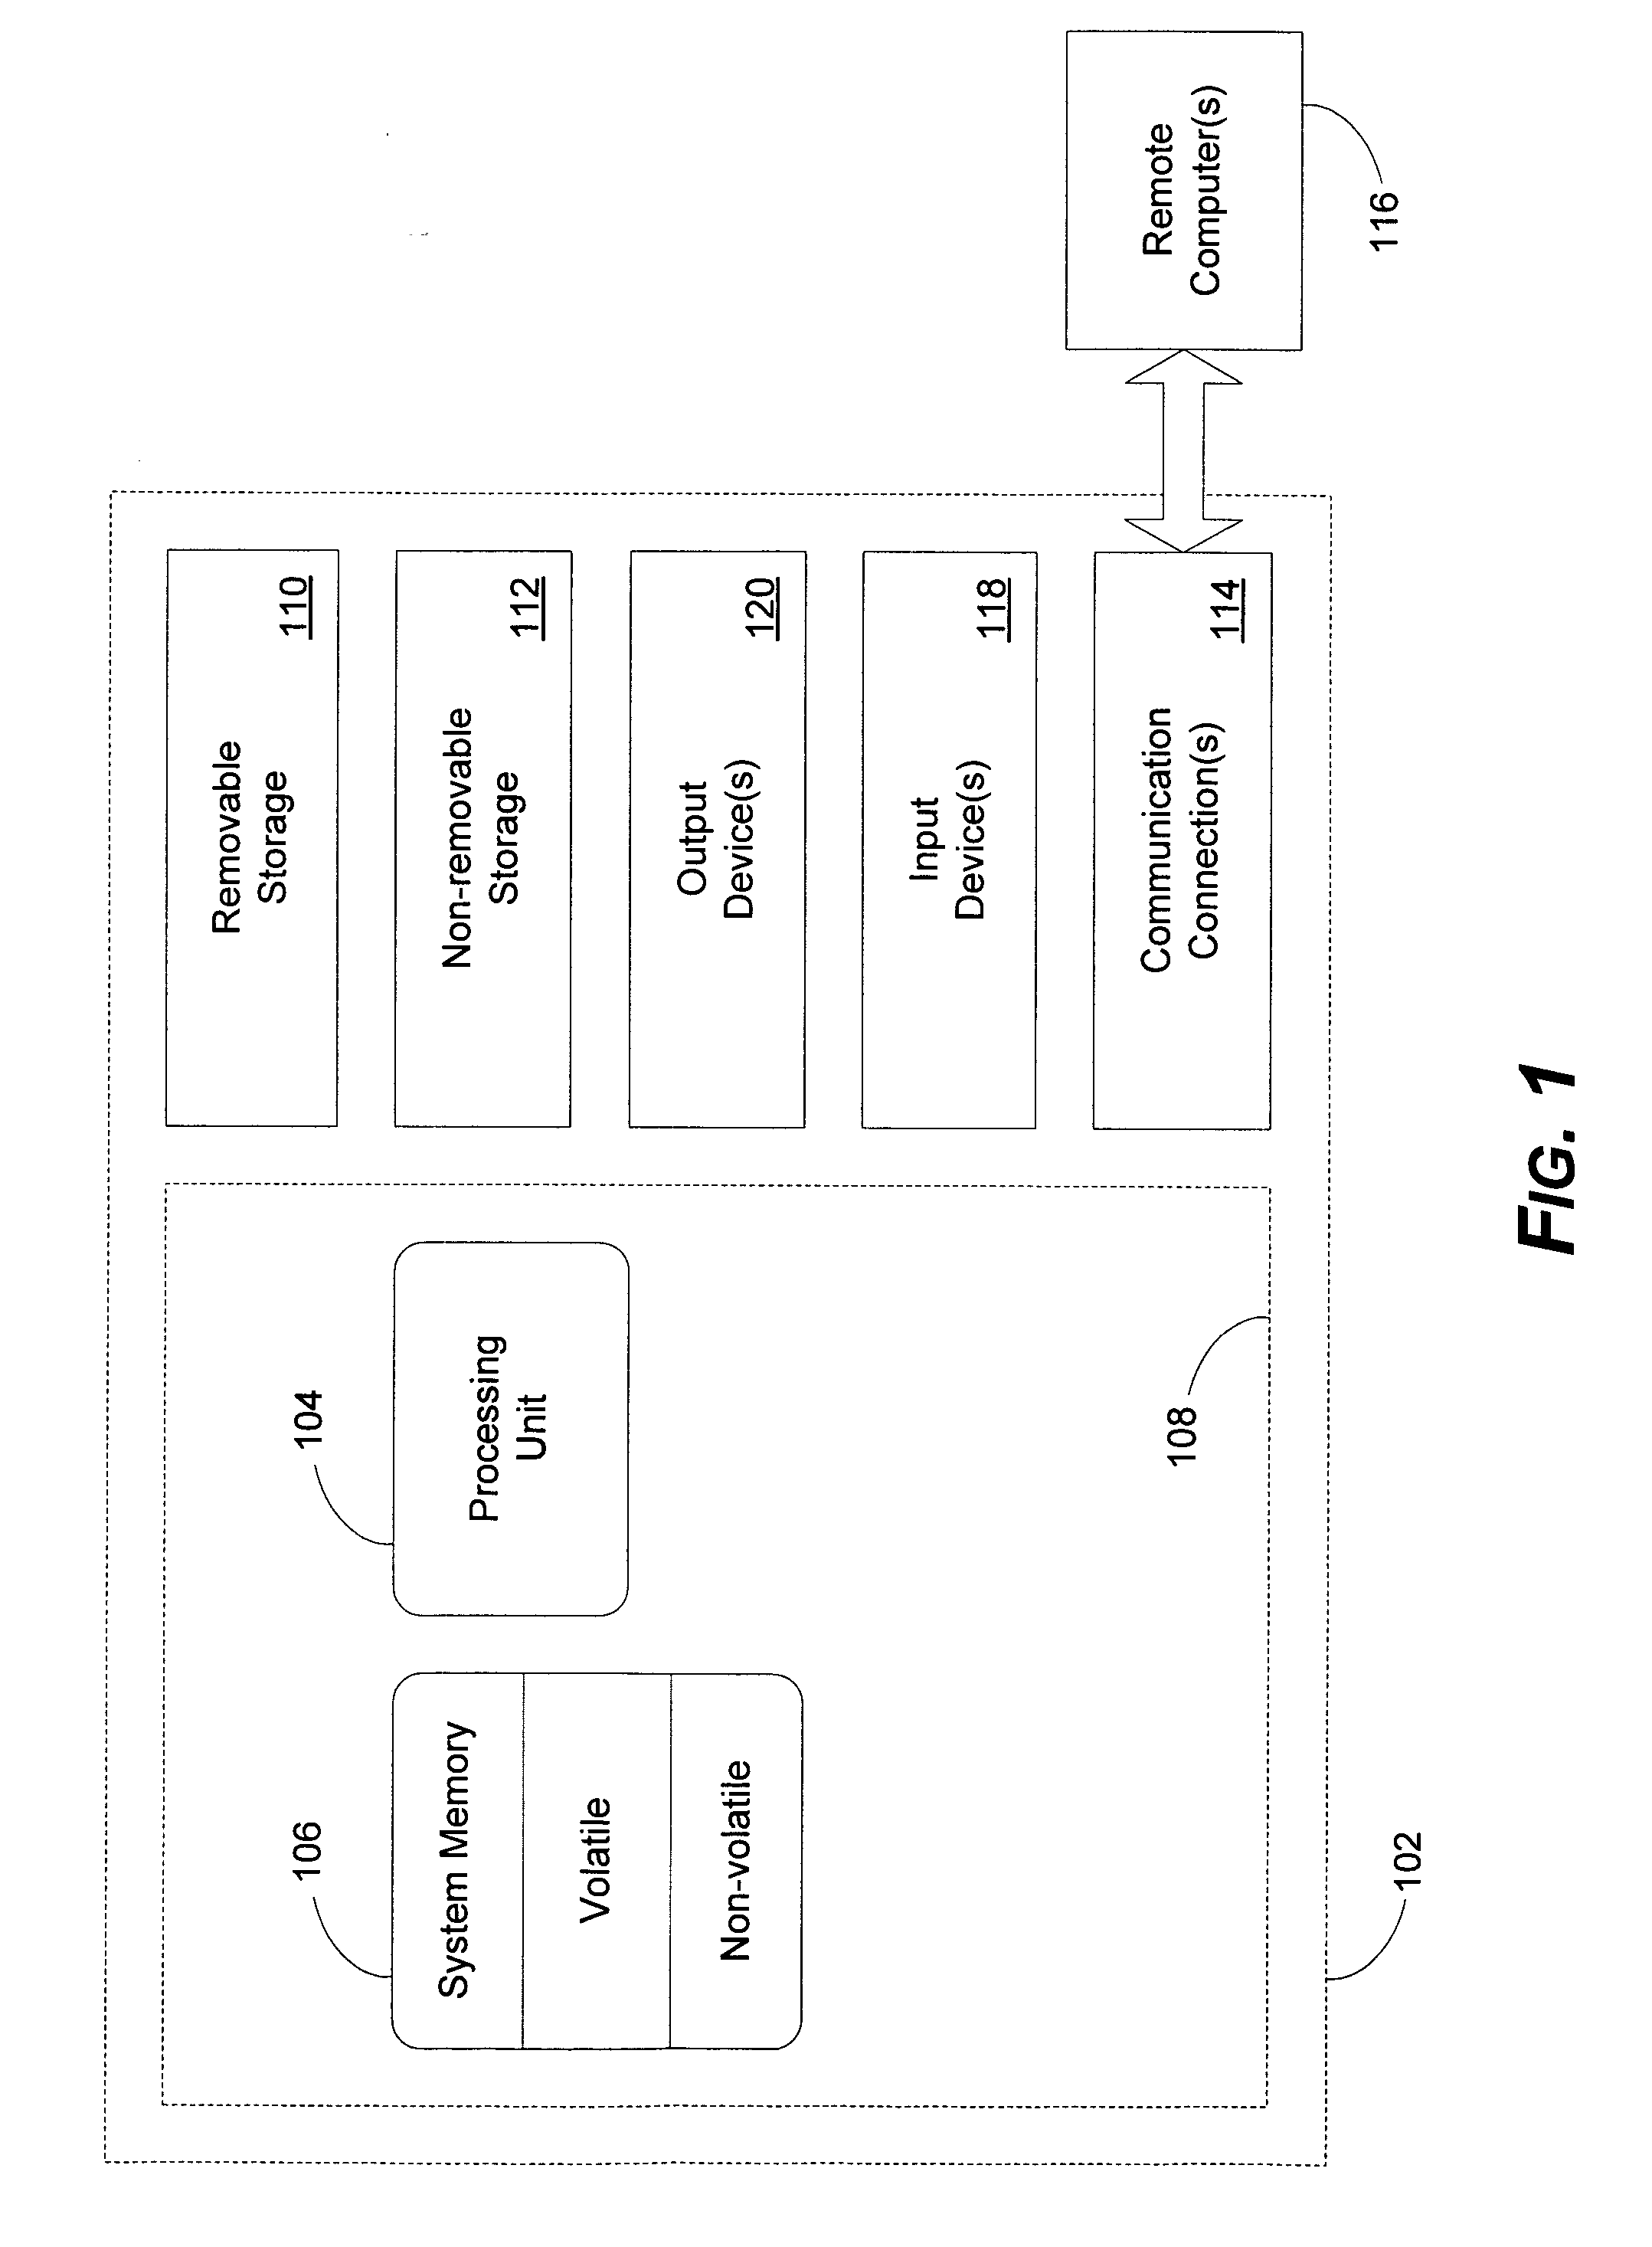 System and method for efficient configuration of group policies